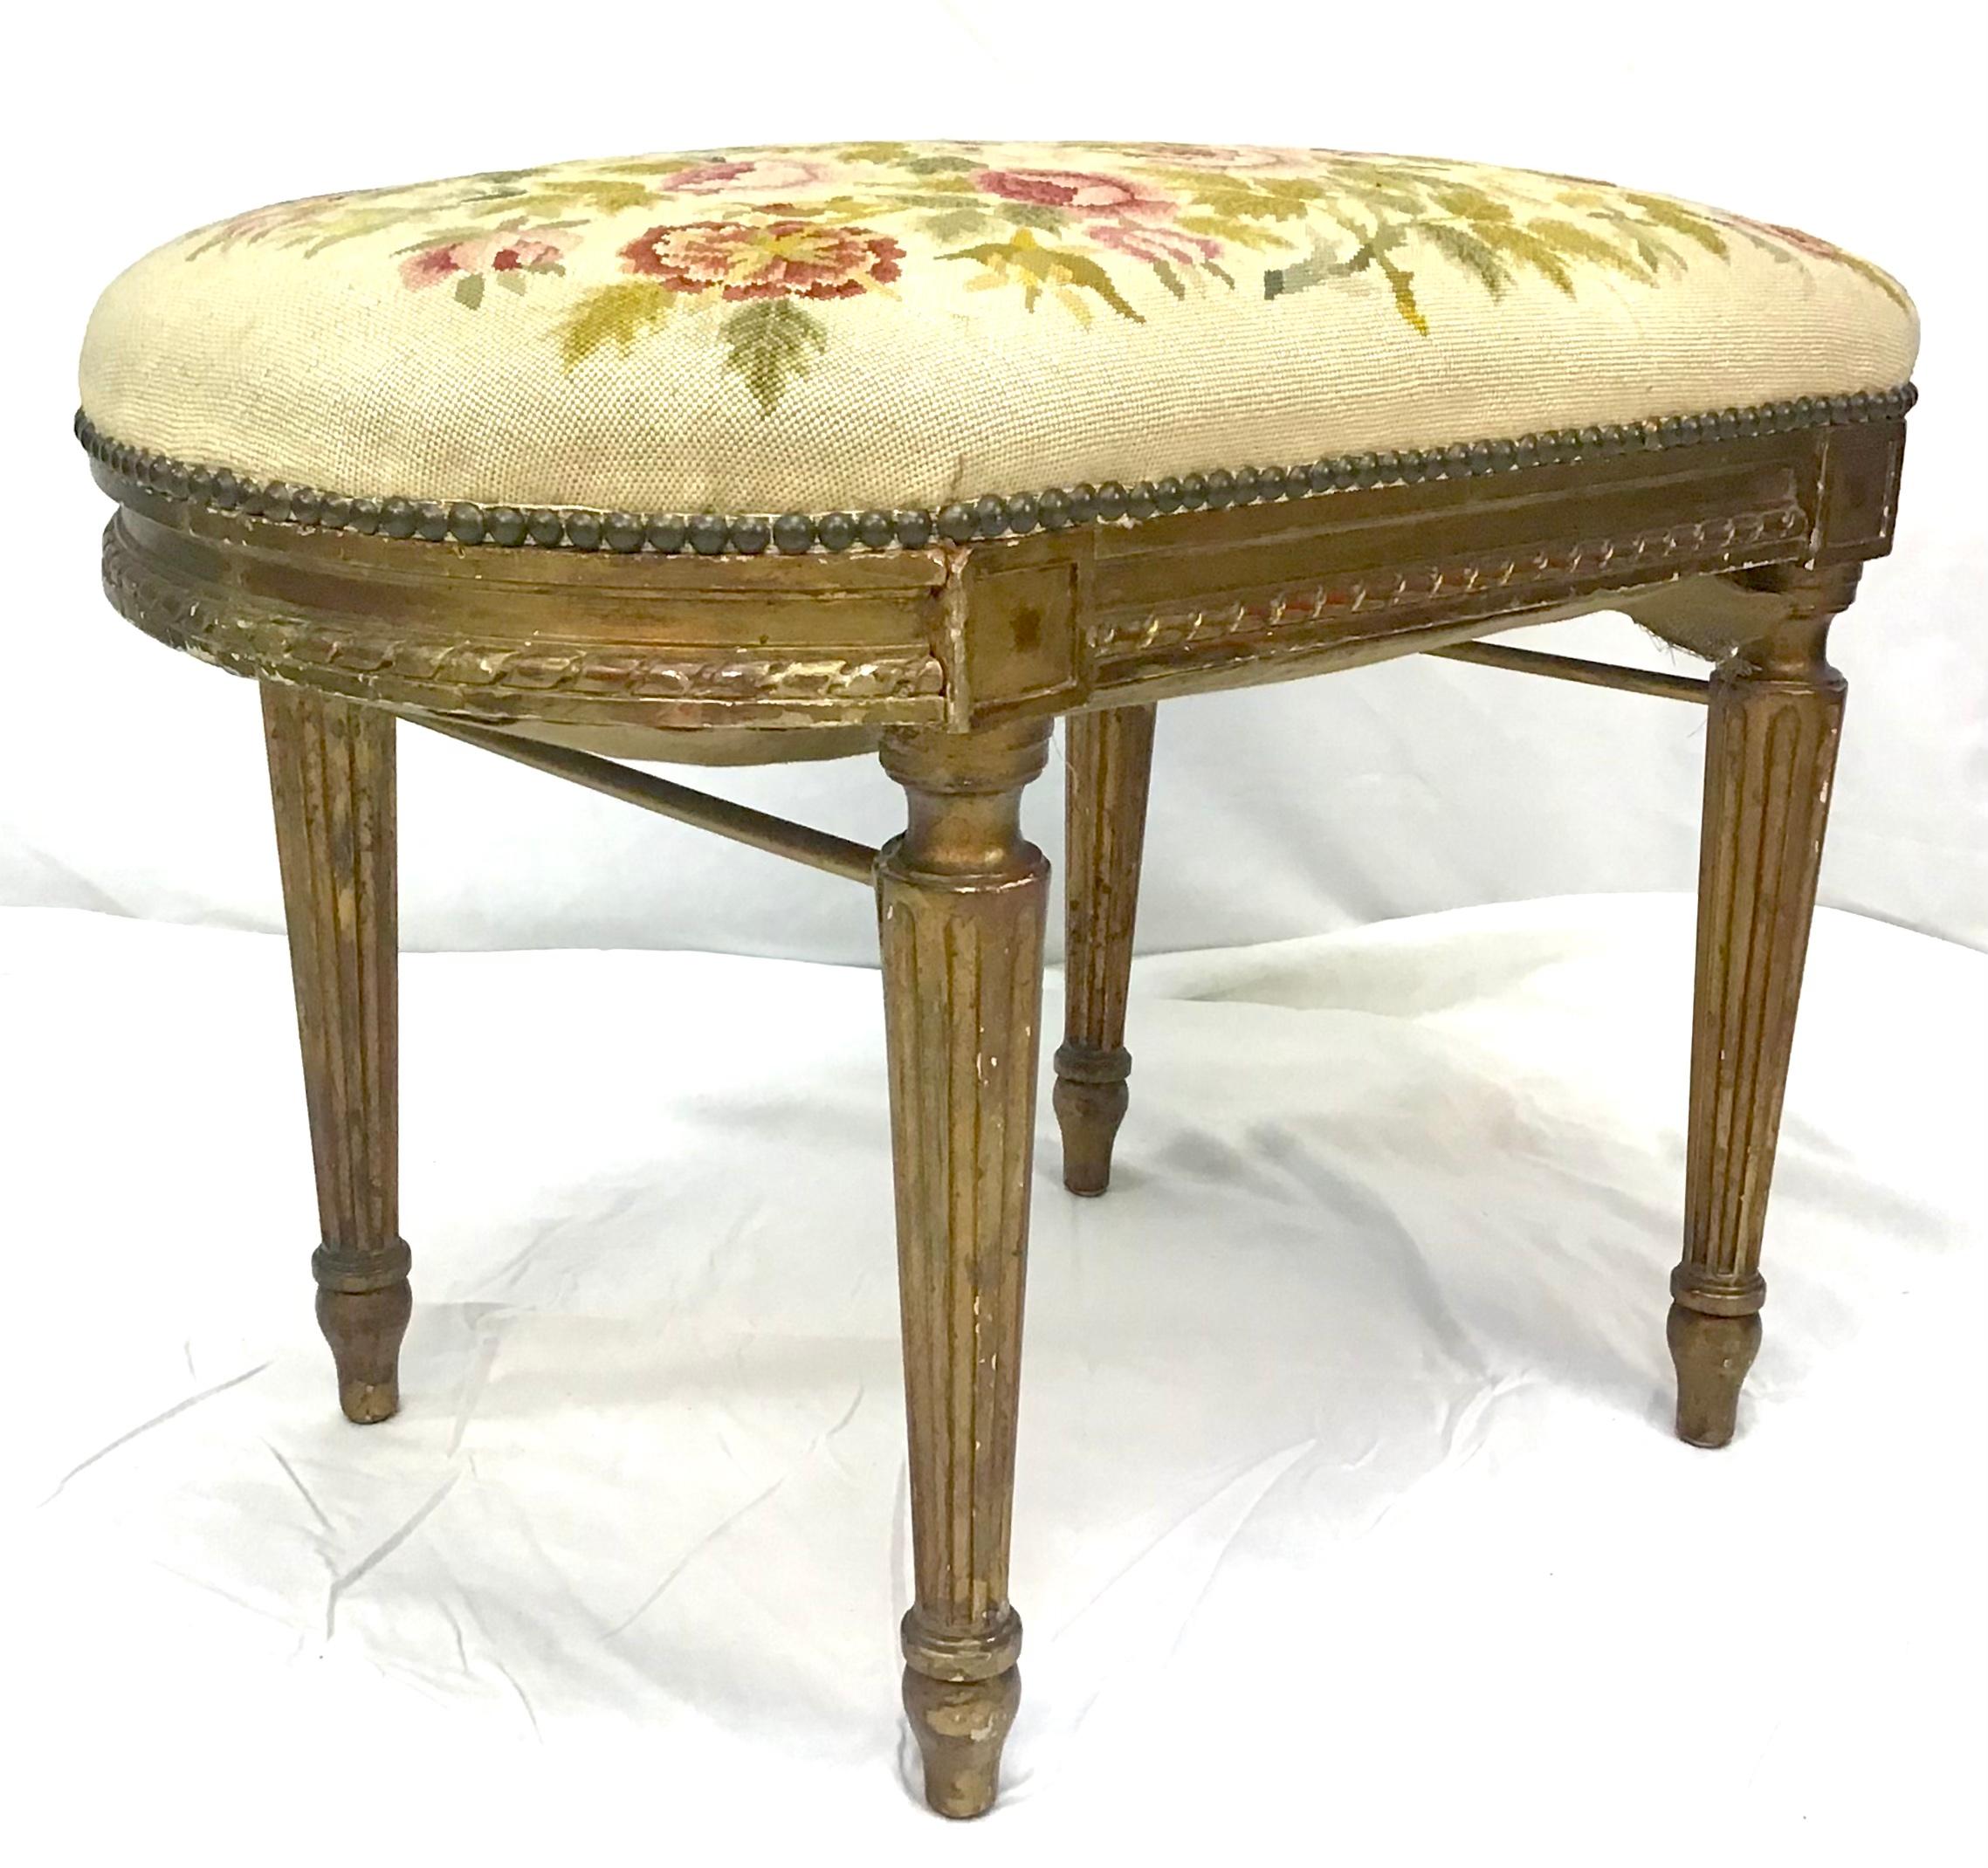 Louis XVI Style Giltwood Tabouret In Good Condition For Sale In Bradenton, FL